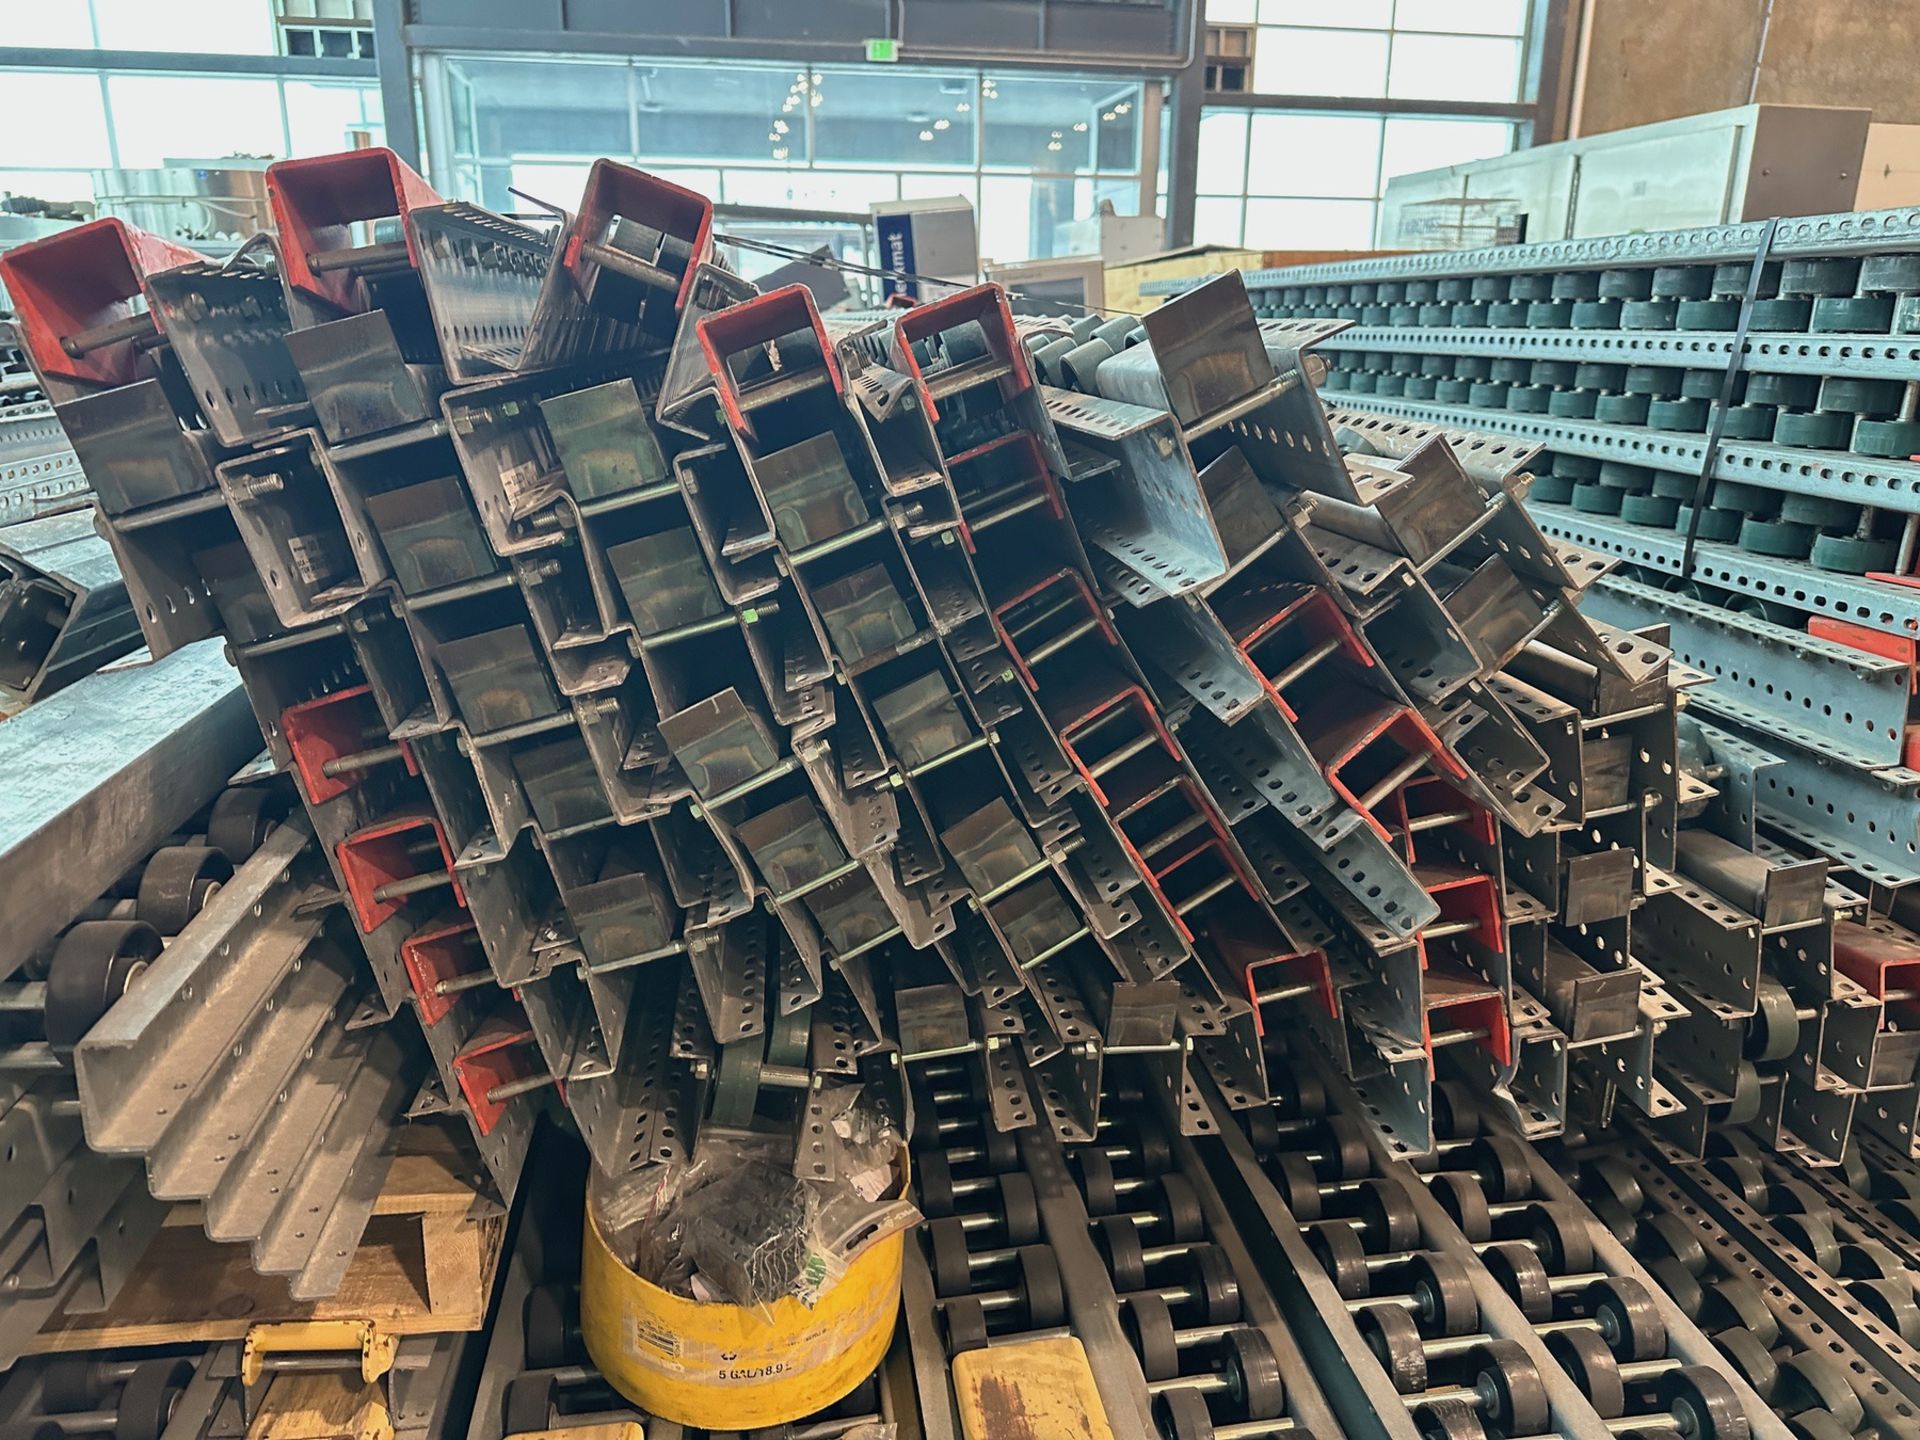 Lot of Interroll Pallet Racking Rollers - Approx. (150) Total Pieces at 5" x 100" | Rig Fee $350 - Image 3 of 5